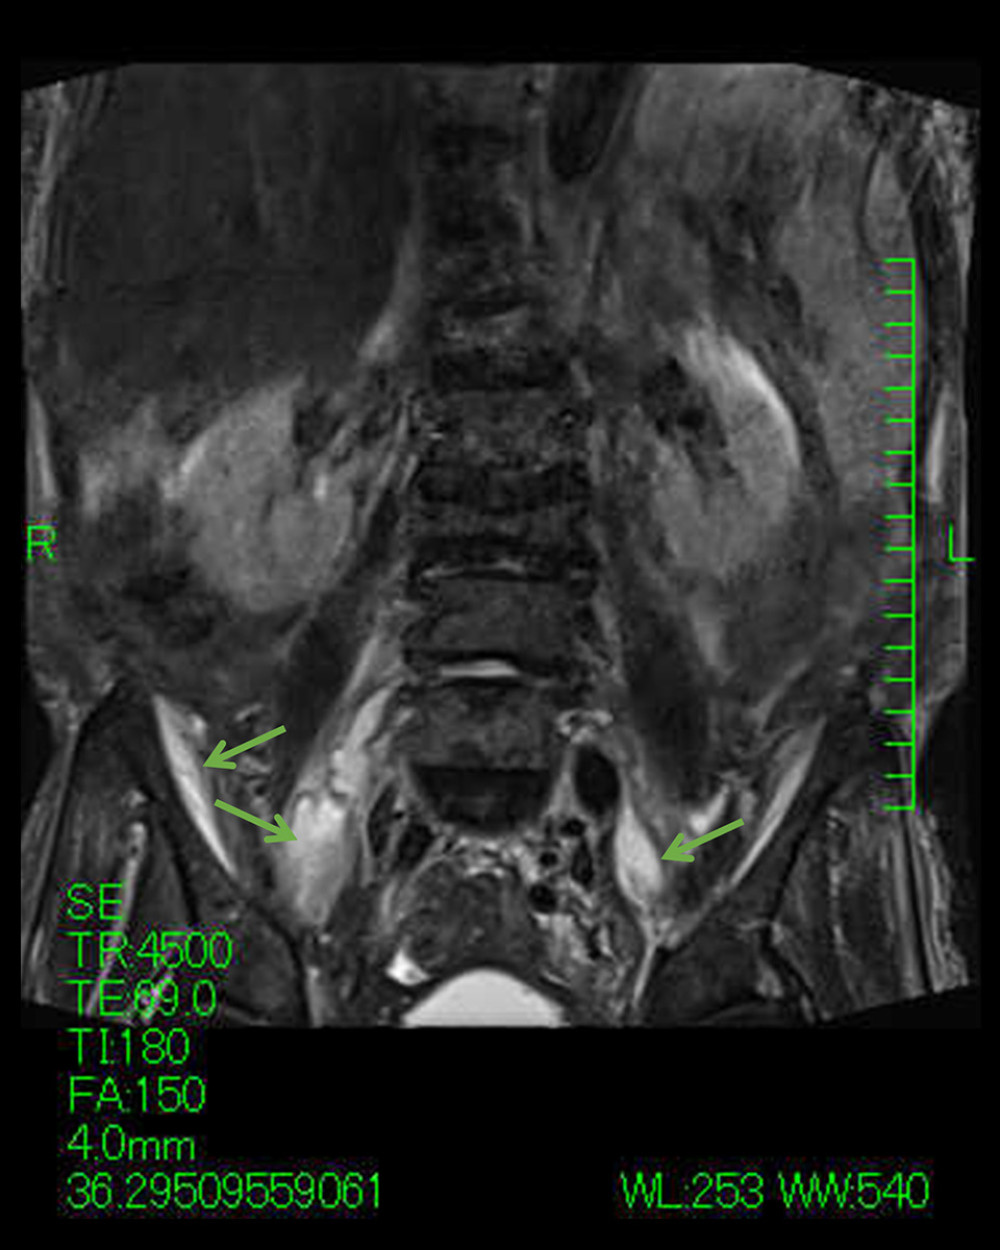 Coronal magnetic resonance imaging, short T1 inversion recovery sequence, demonstrates bilateral fluid retention in the psoas muscles and retroperitoneal space, suggesting abscesses (arrows).